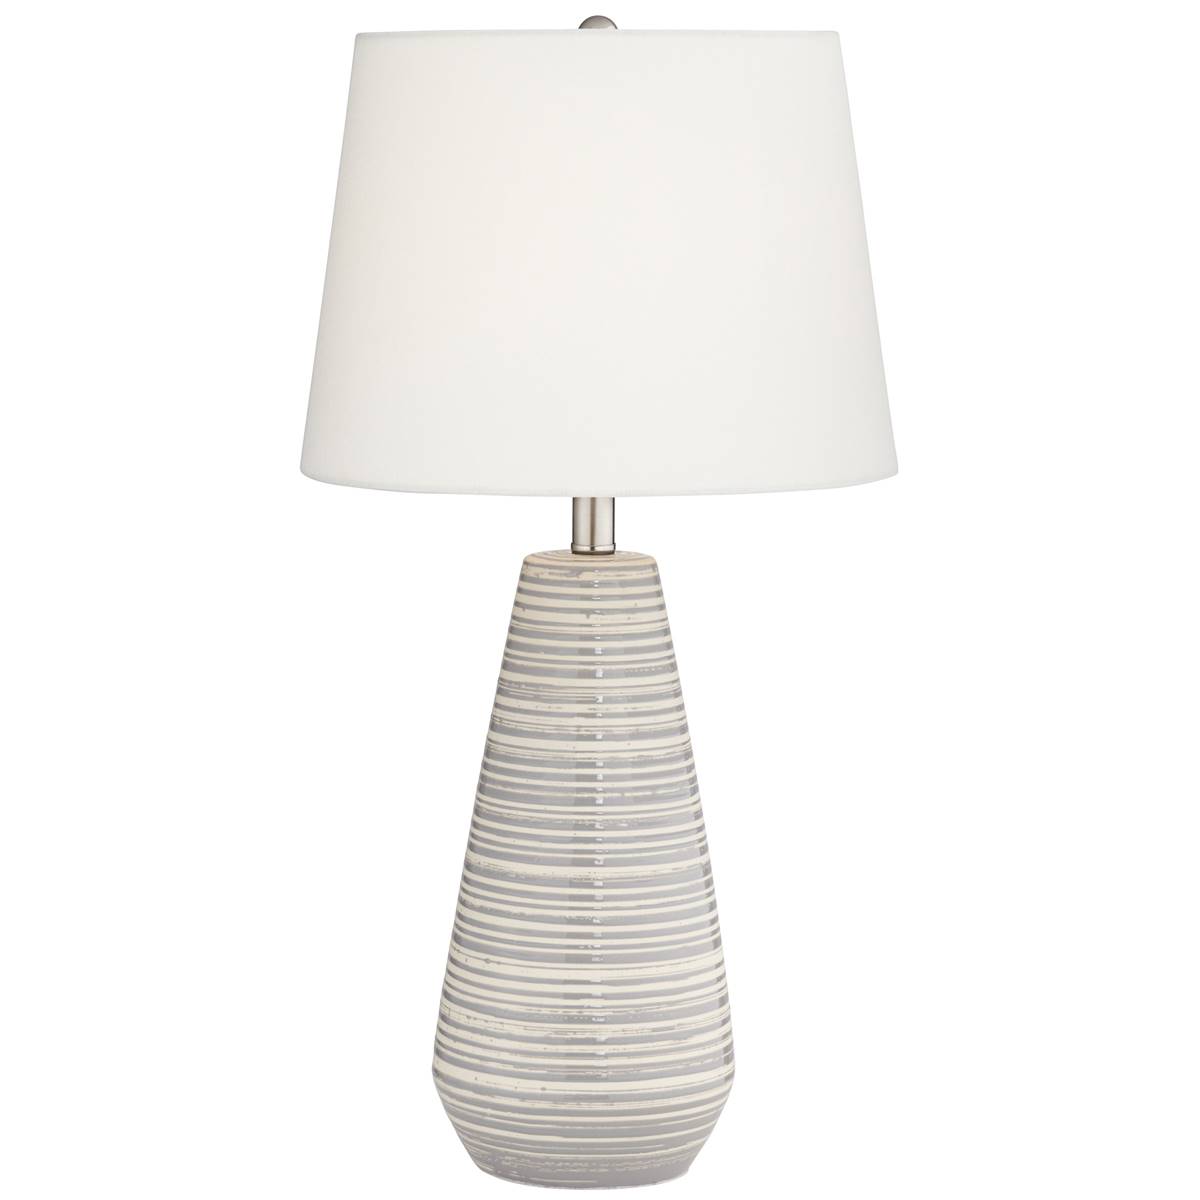 Pacific Coast Lighting Sully 27in. Grey Seagull Table Lamp